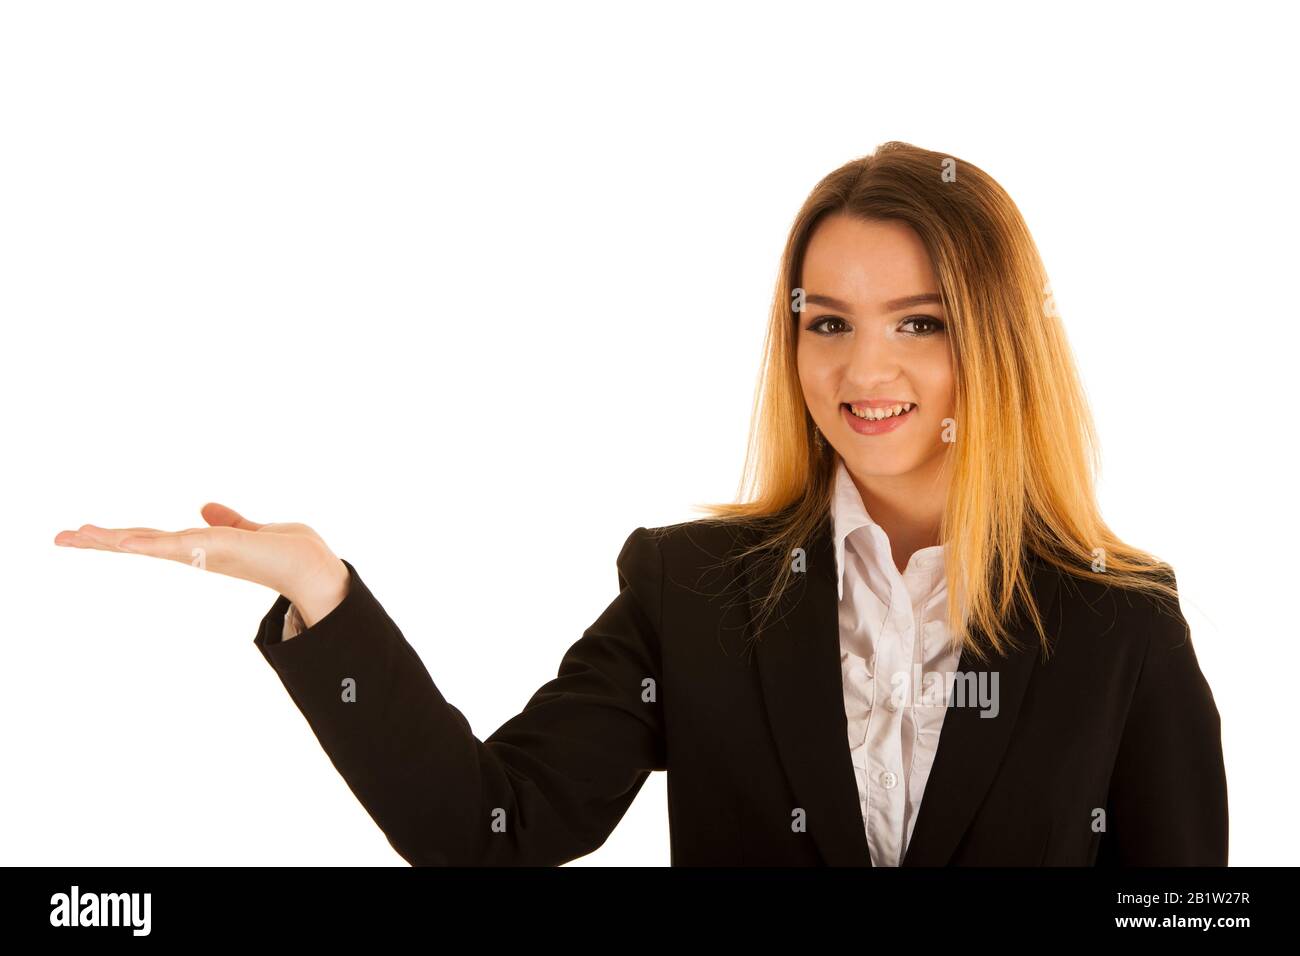 business woman holds hand over copy space for marketing a product Stock Photo